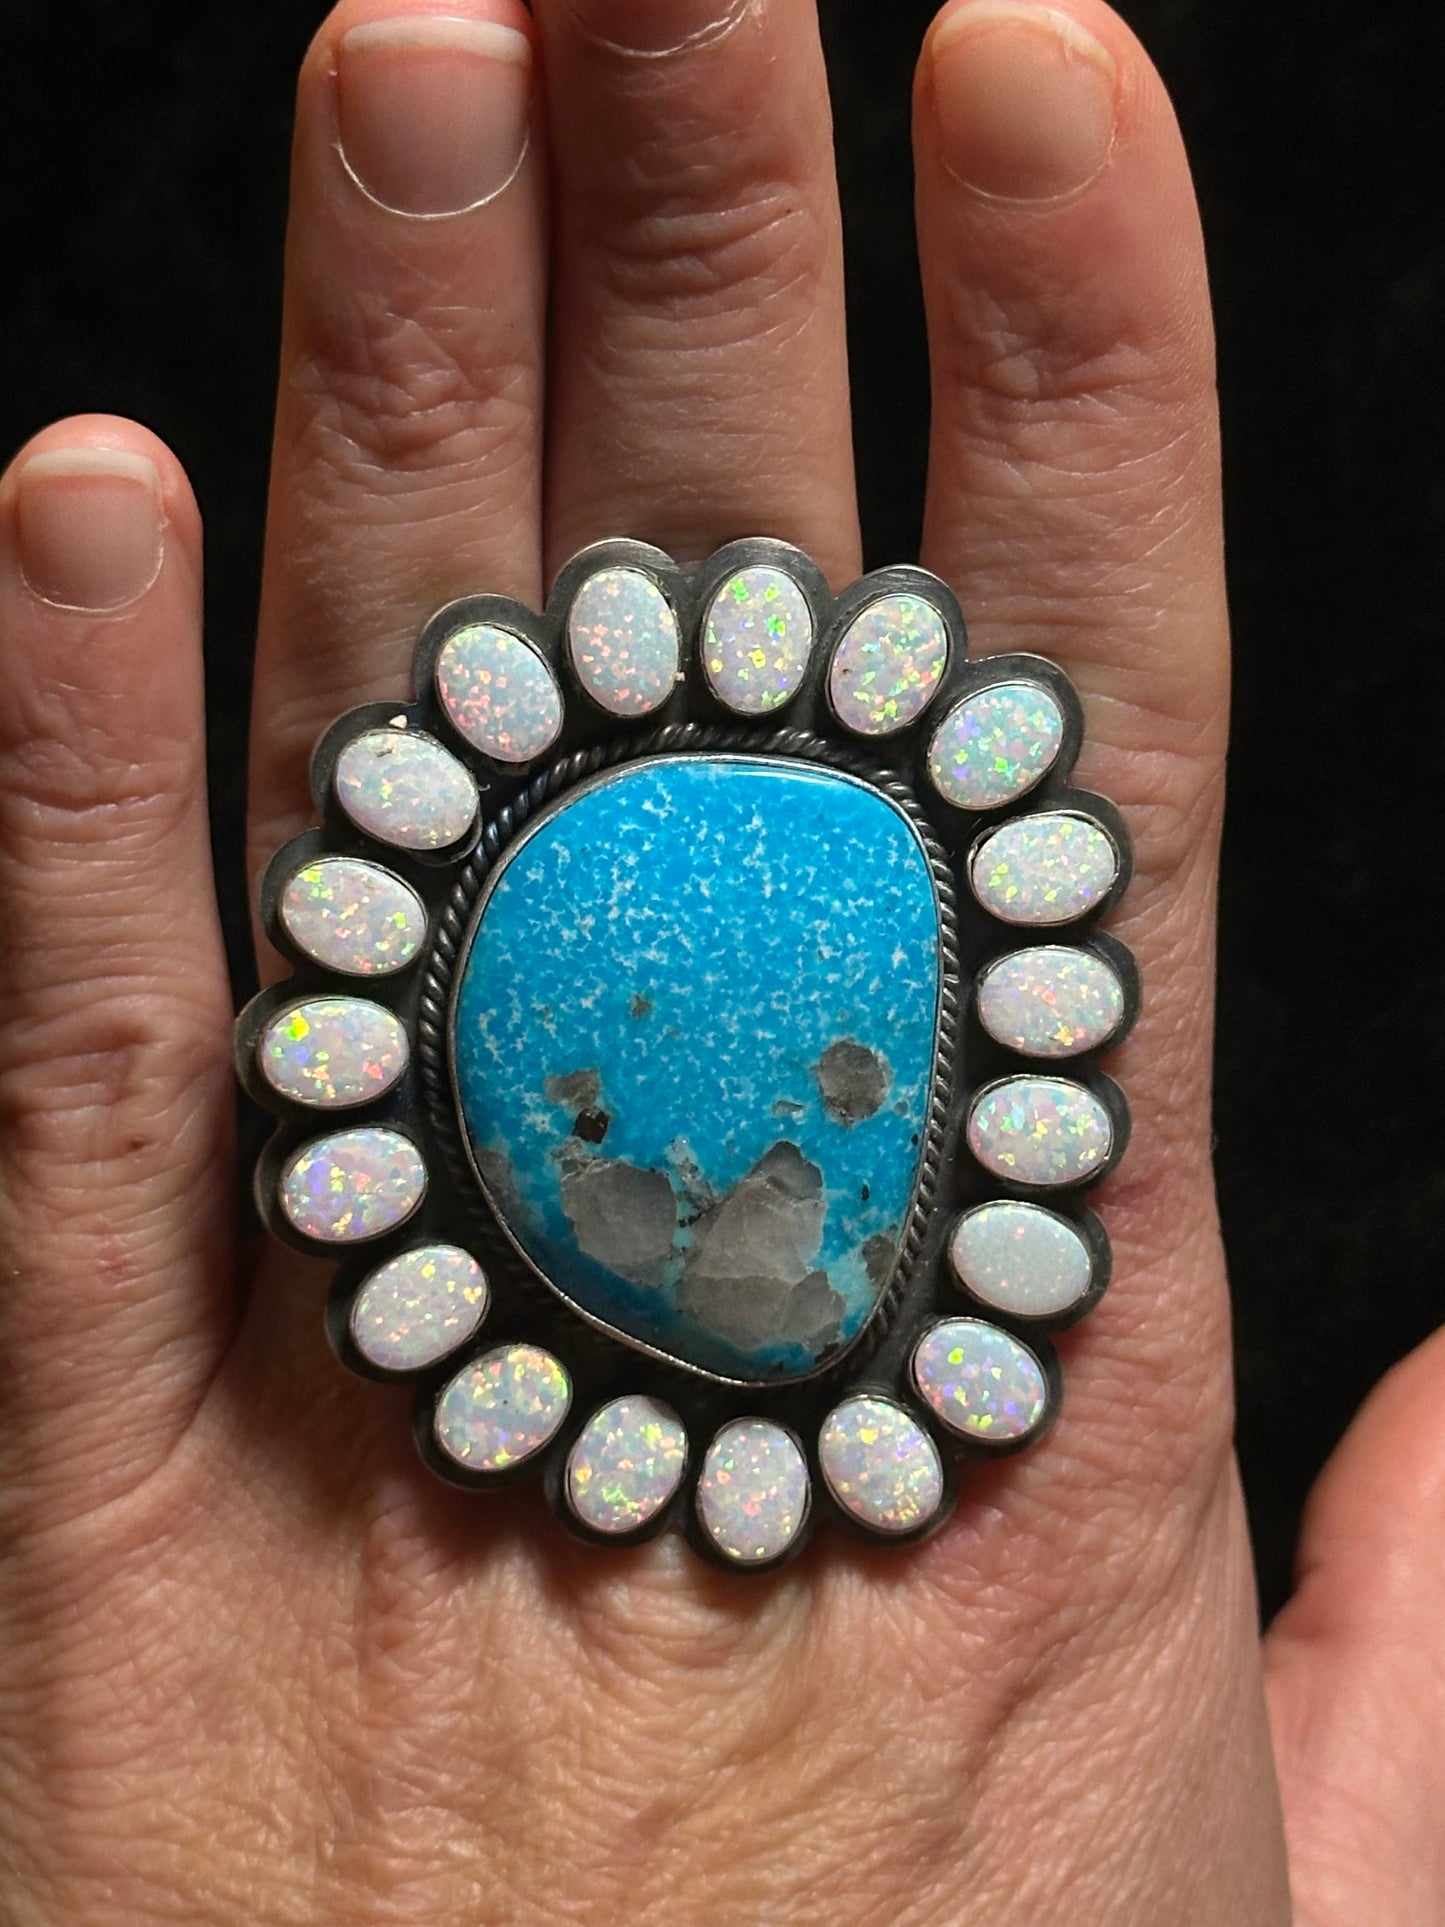 12.0 Kingman Turquoise Ring with Opal Stones by Zia